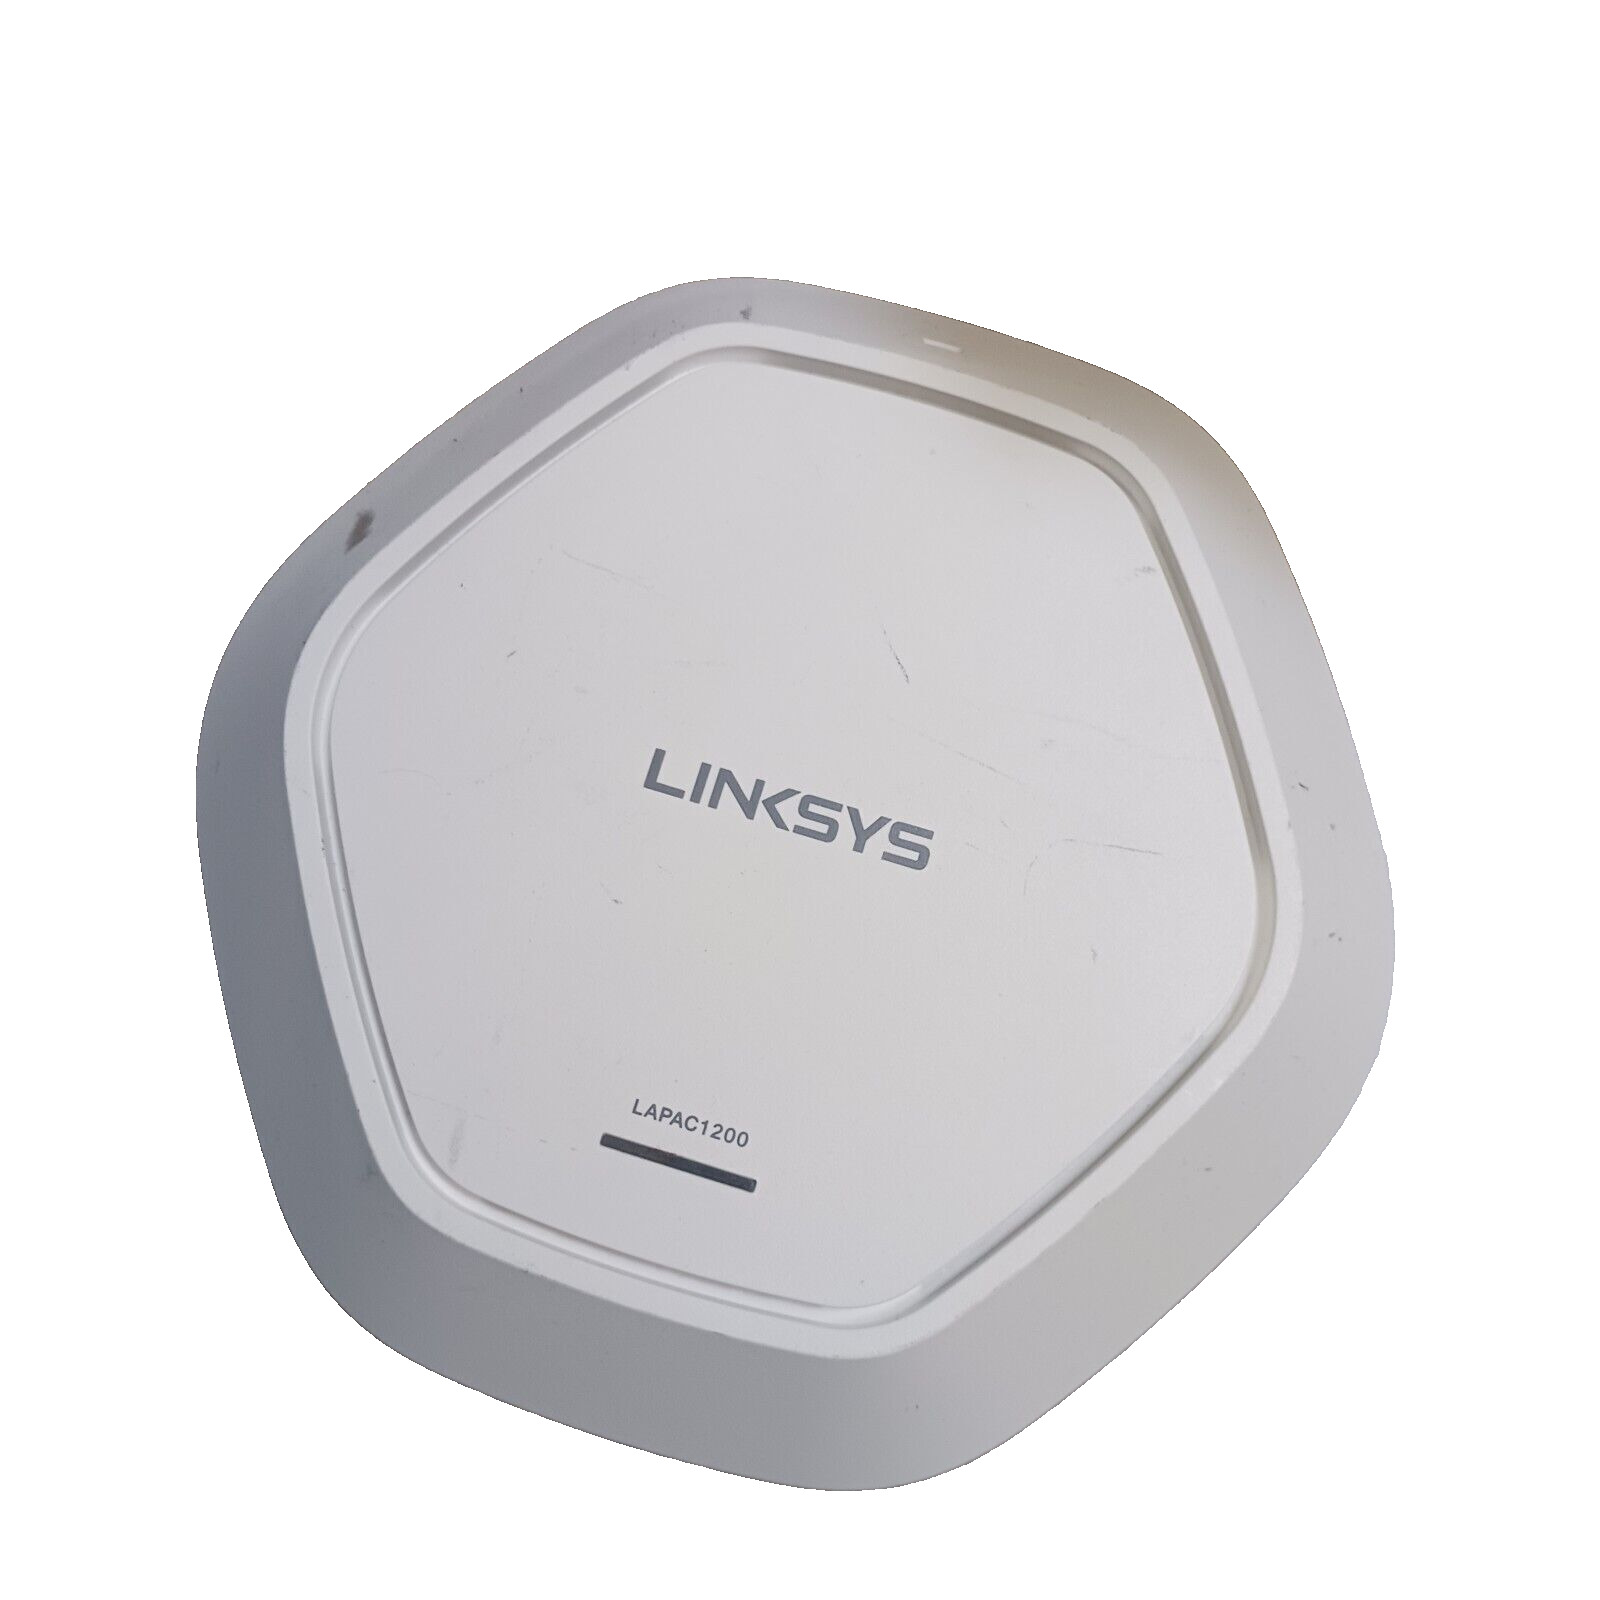 Linksys Business LAPAC1200 Dual Band Wireless WiFi Access Point - Dual Band